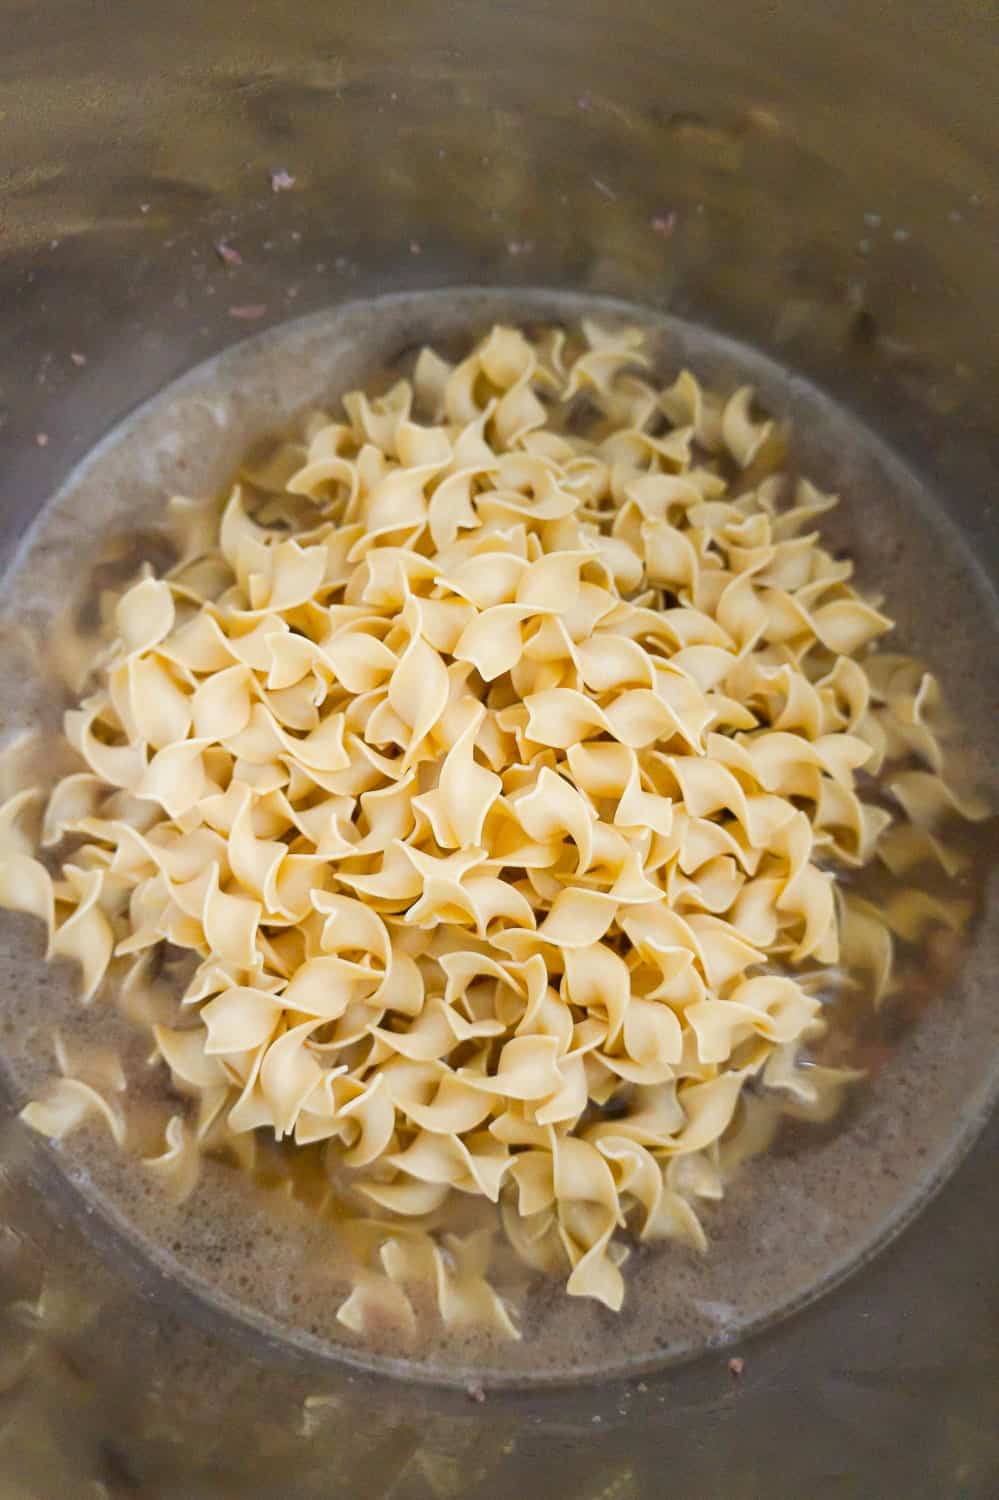 uncooked egg noodles in an Instant Pot